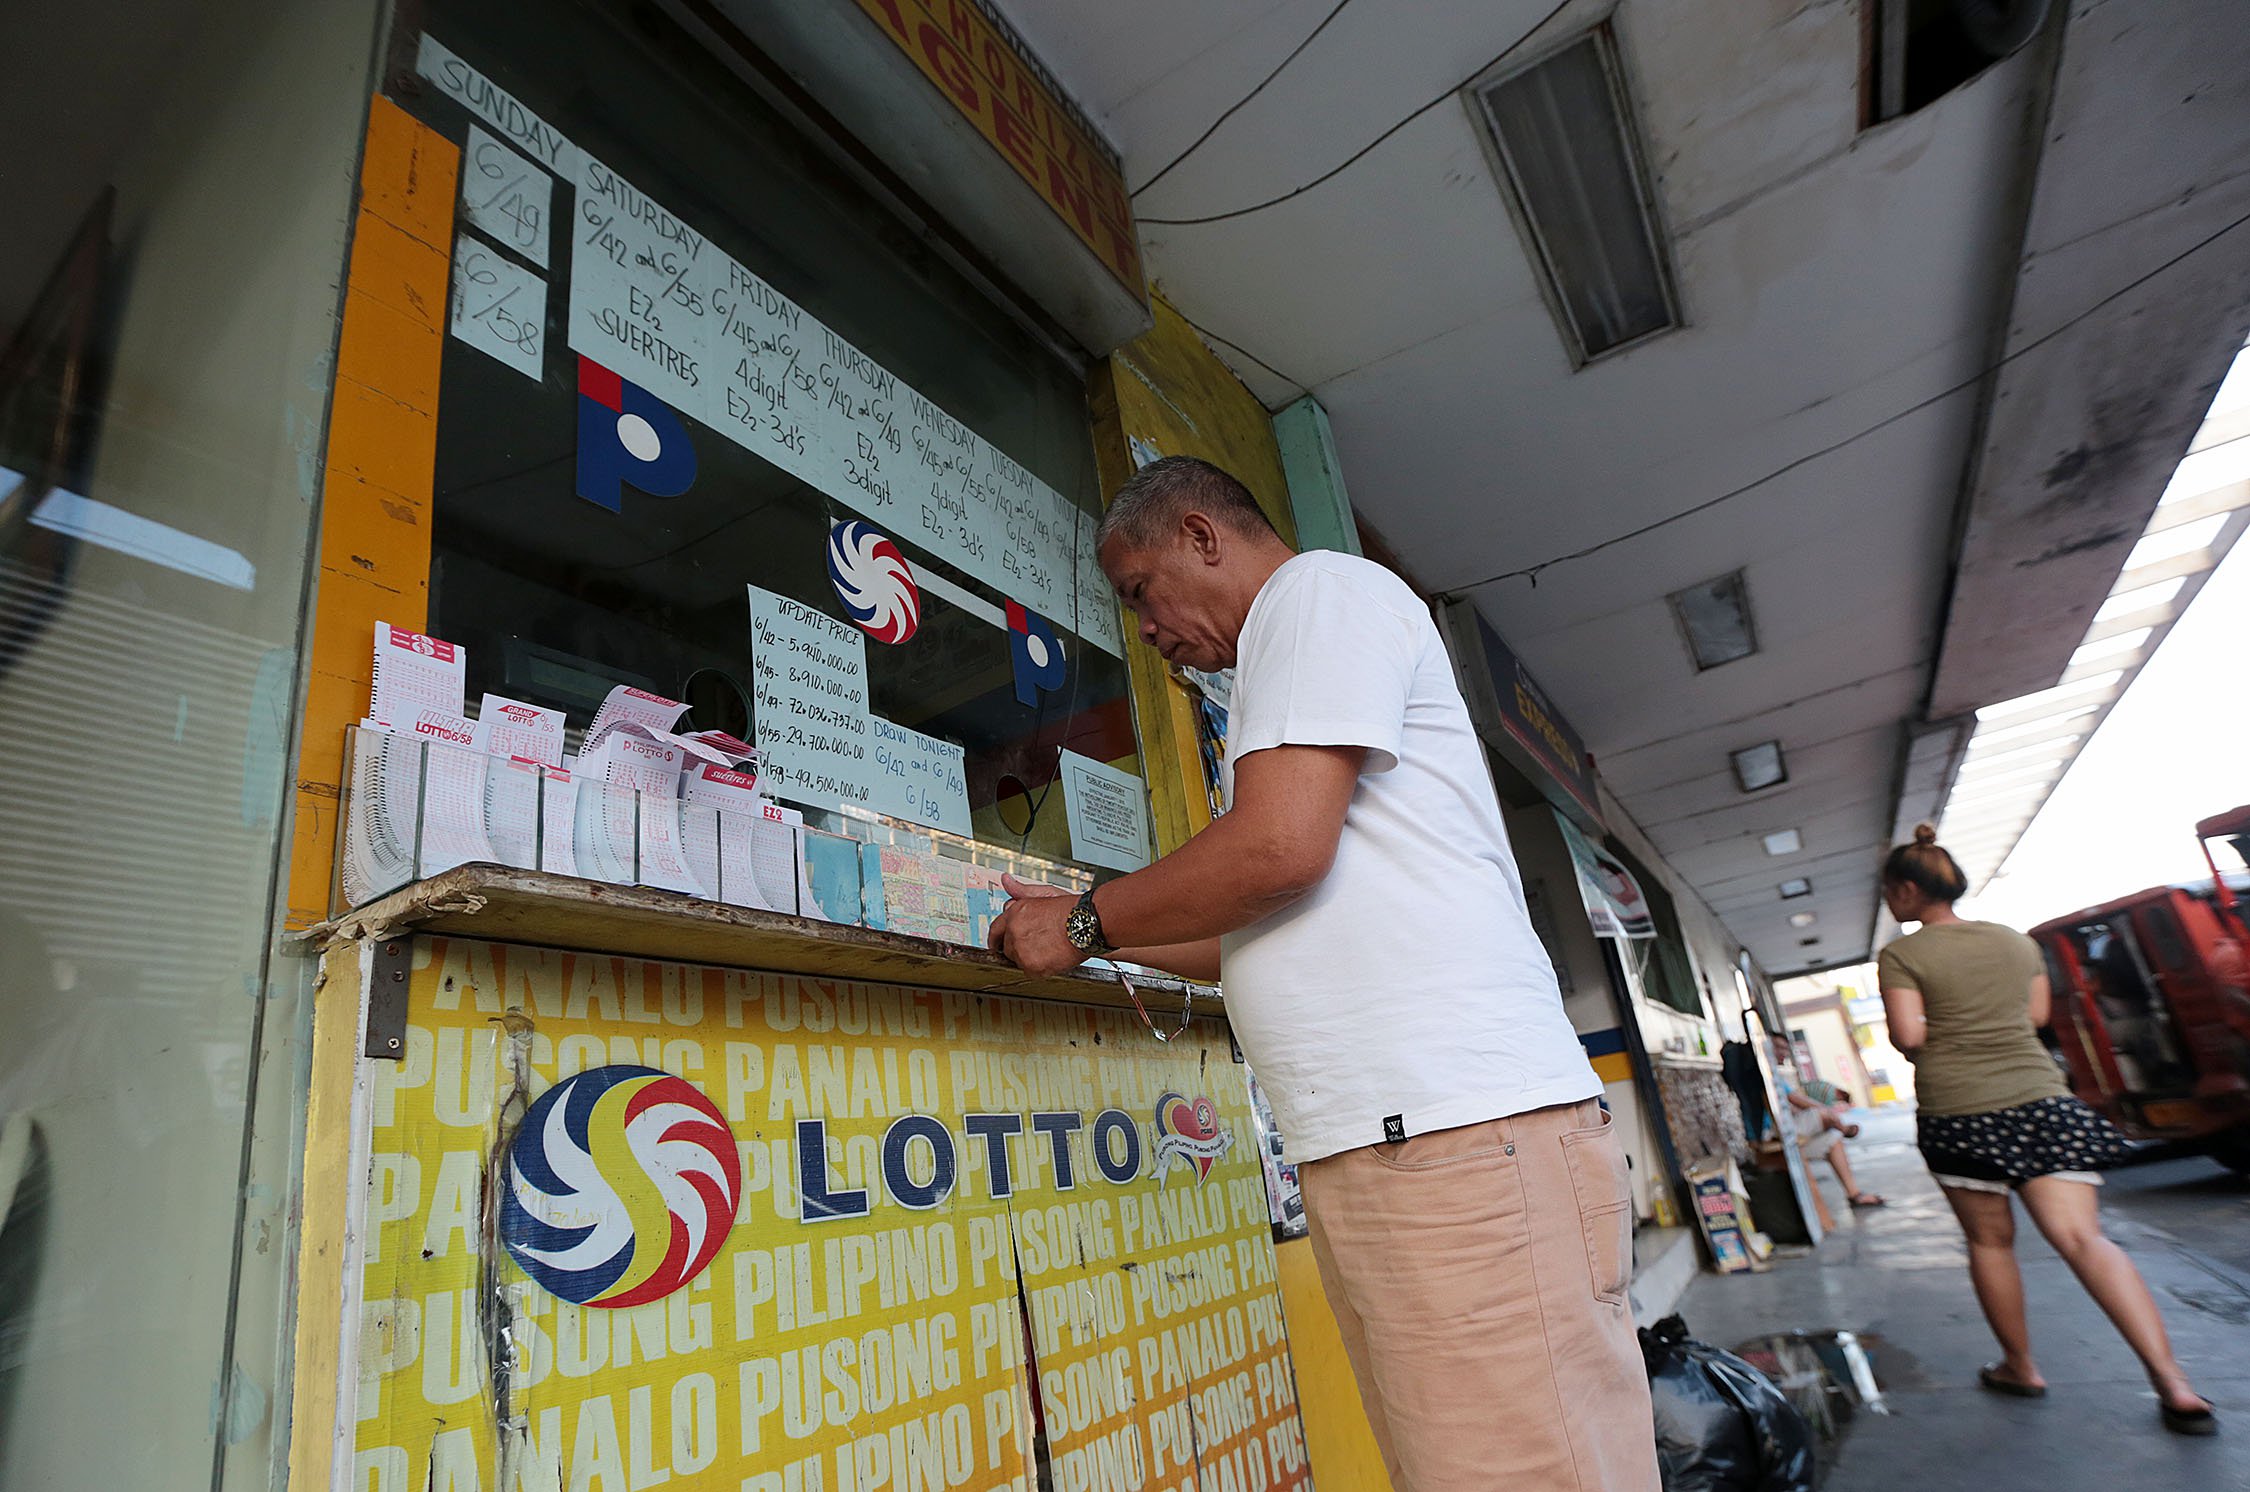 lotto outlet franchise 2018